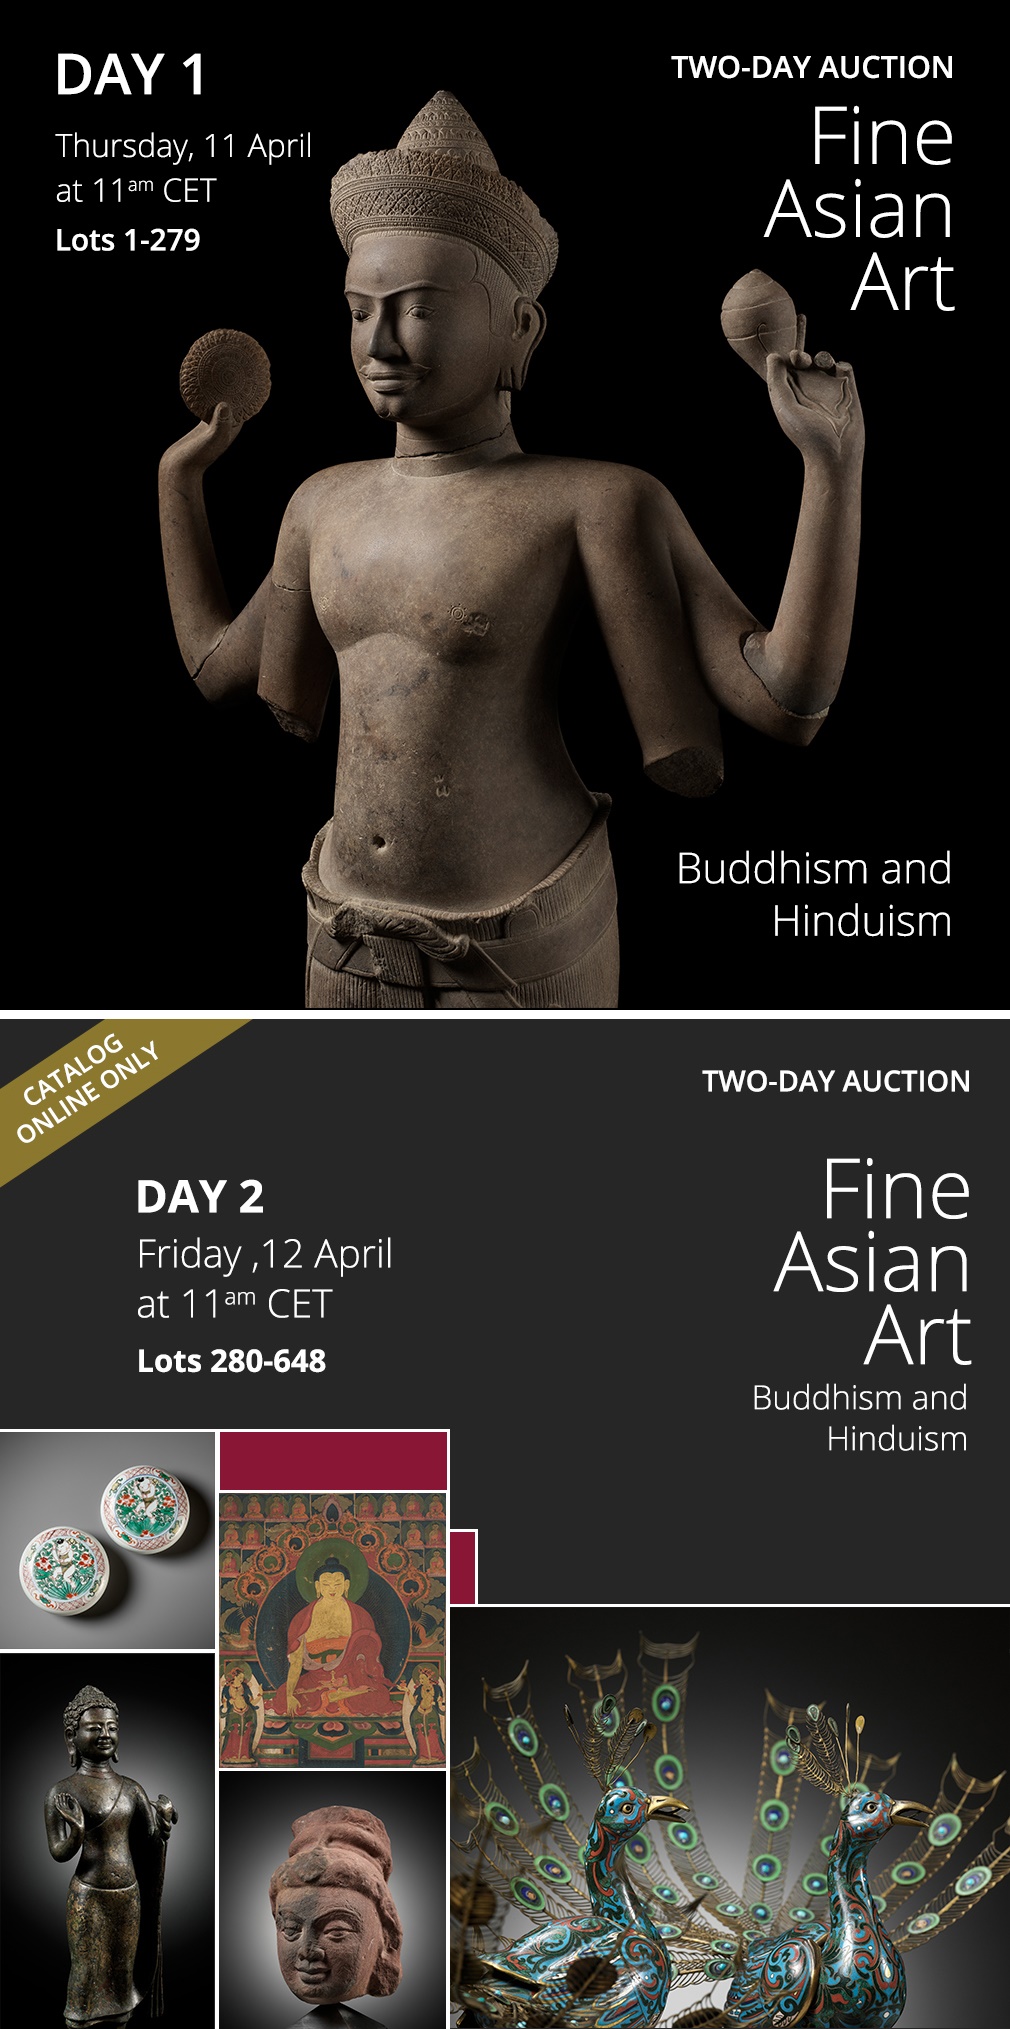  TWO-DAY AUCTION: Fine Asian Art, Buddhism and Hinduism 